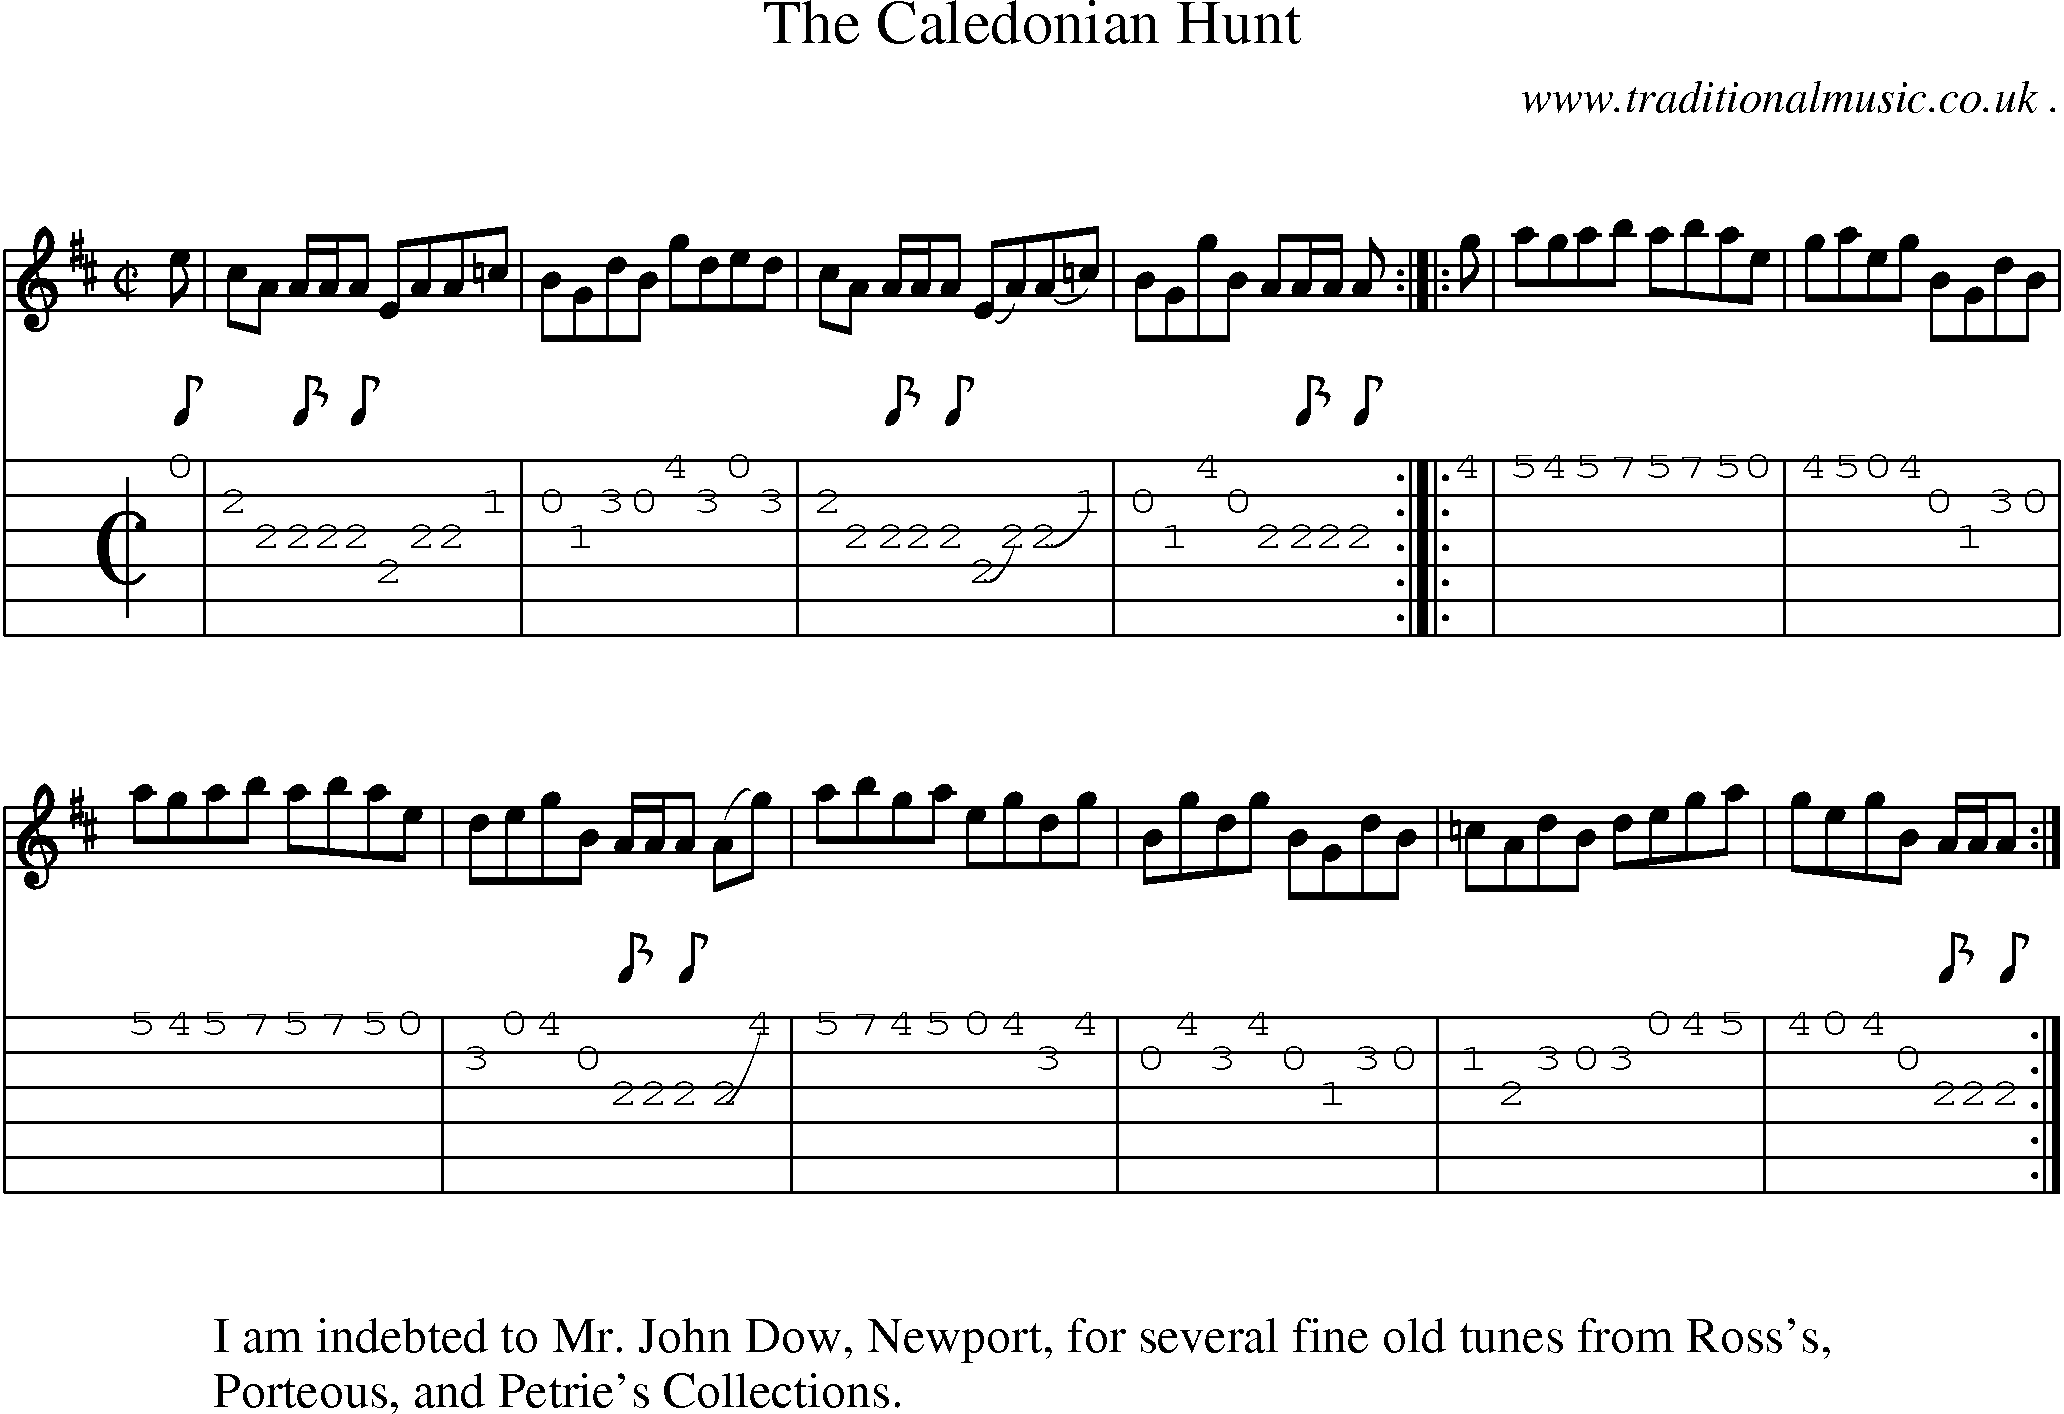 Sheet-music  score, Chords and Guitar Tabs for The Caledonian Hunt